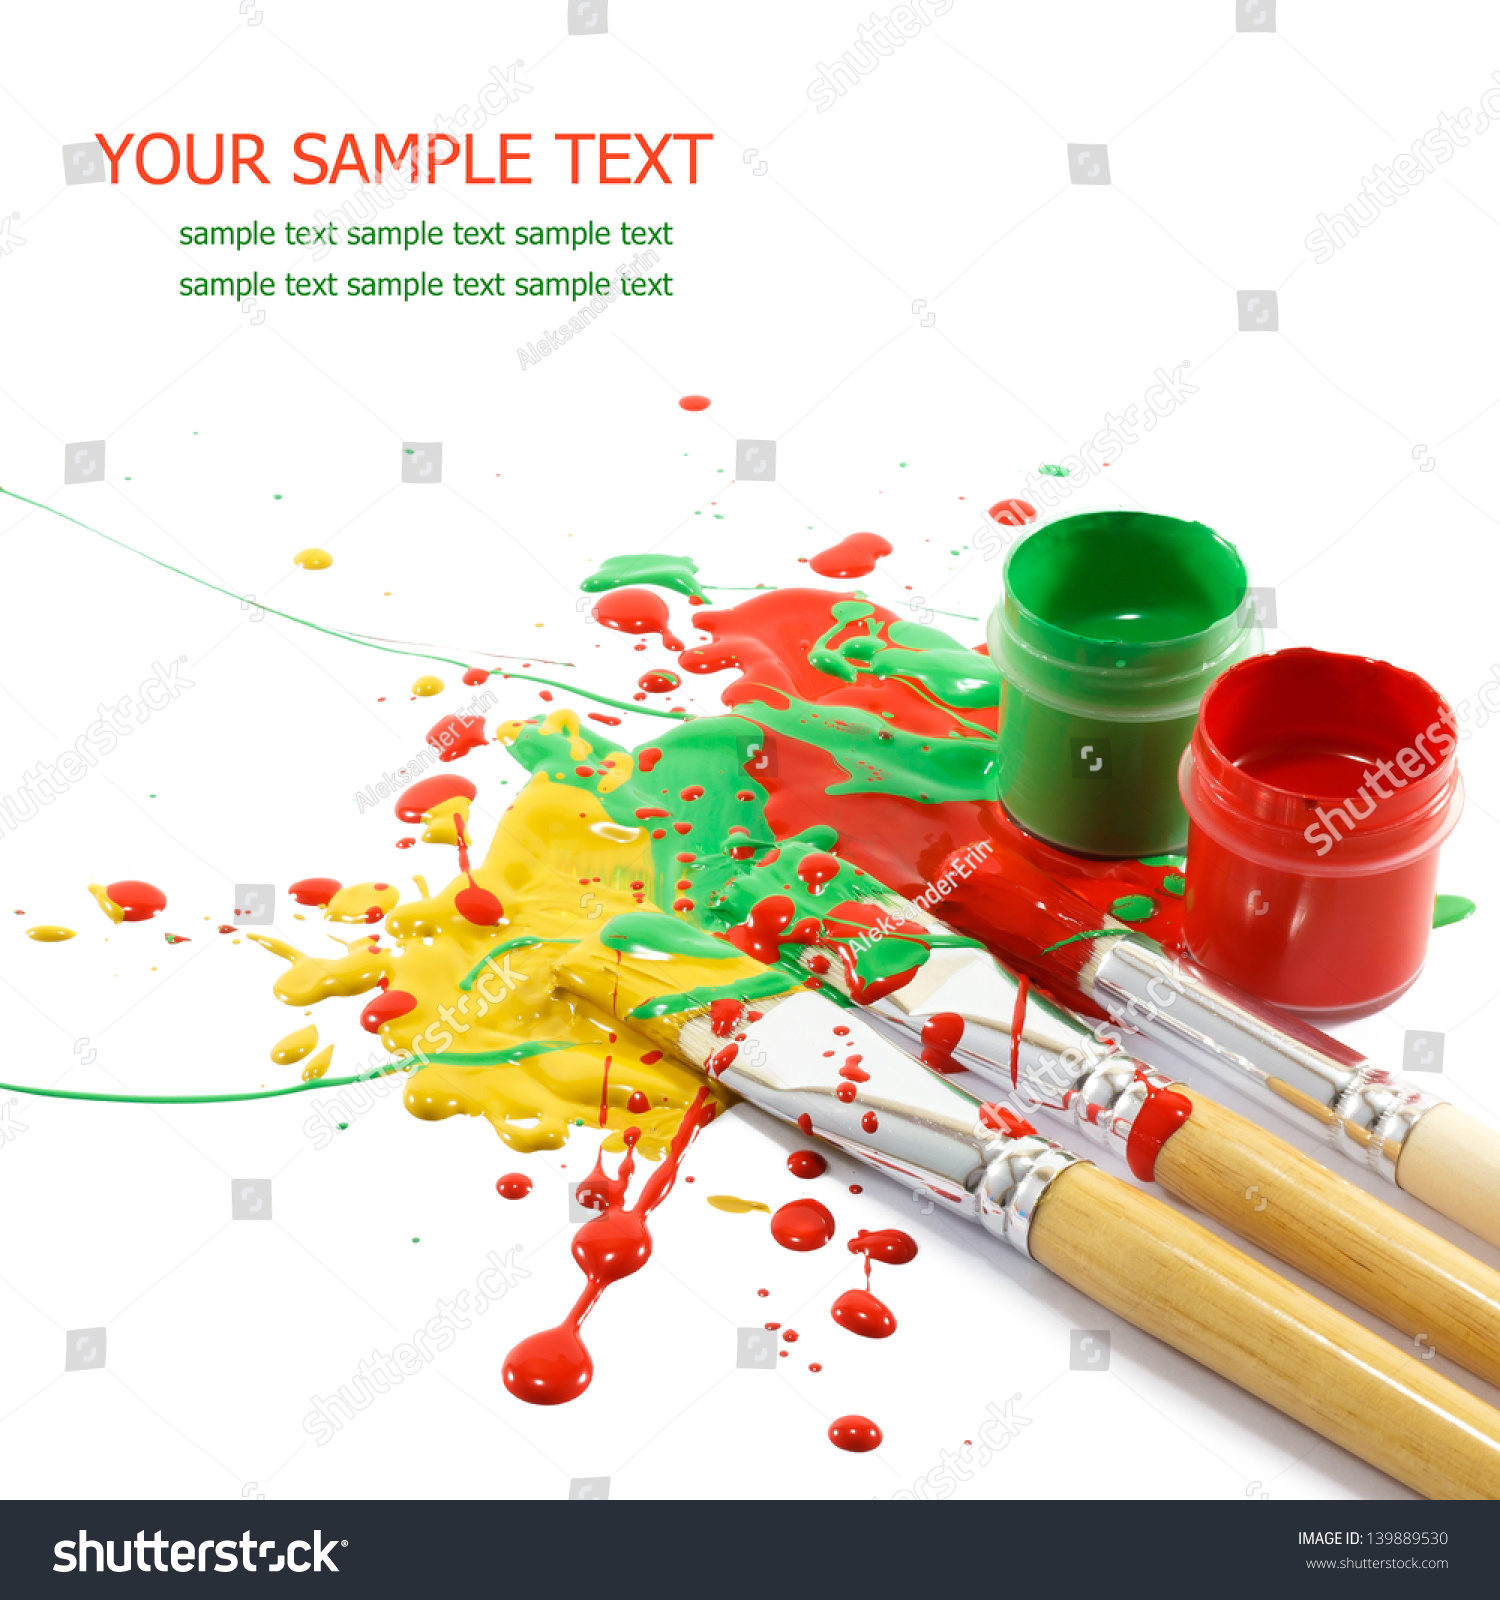 Colorful paints and artist brushes #139889530